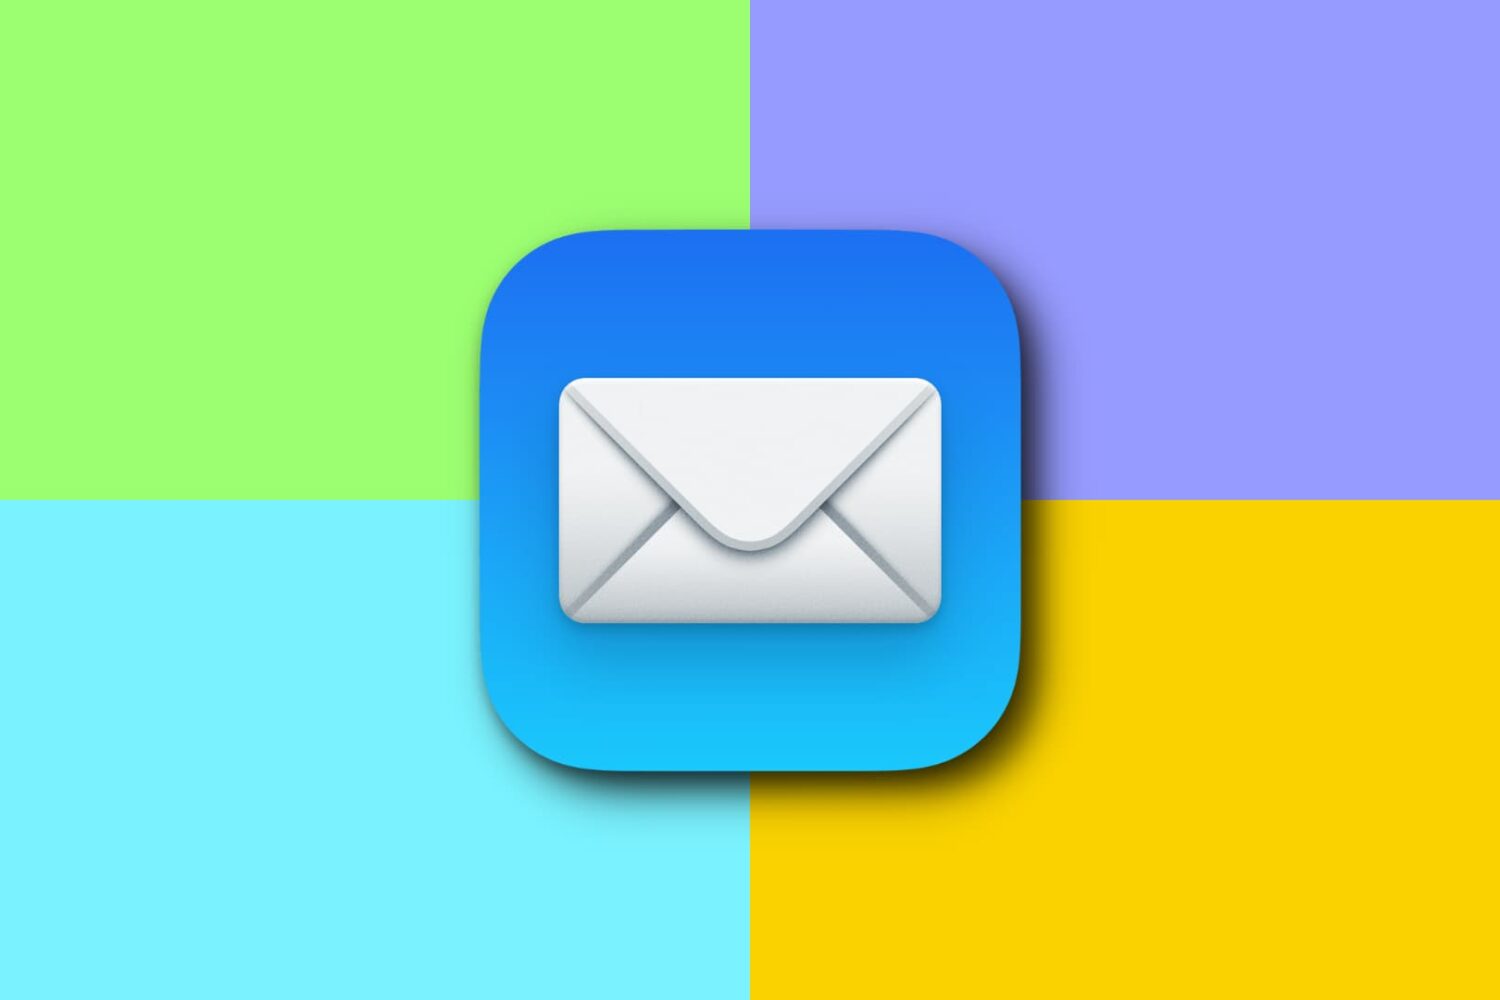 Apple Mail app icon on a colorful background